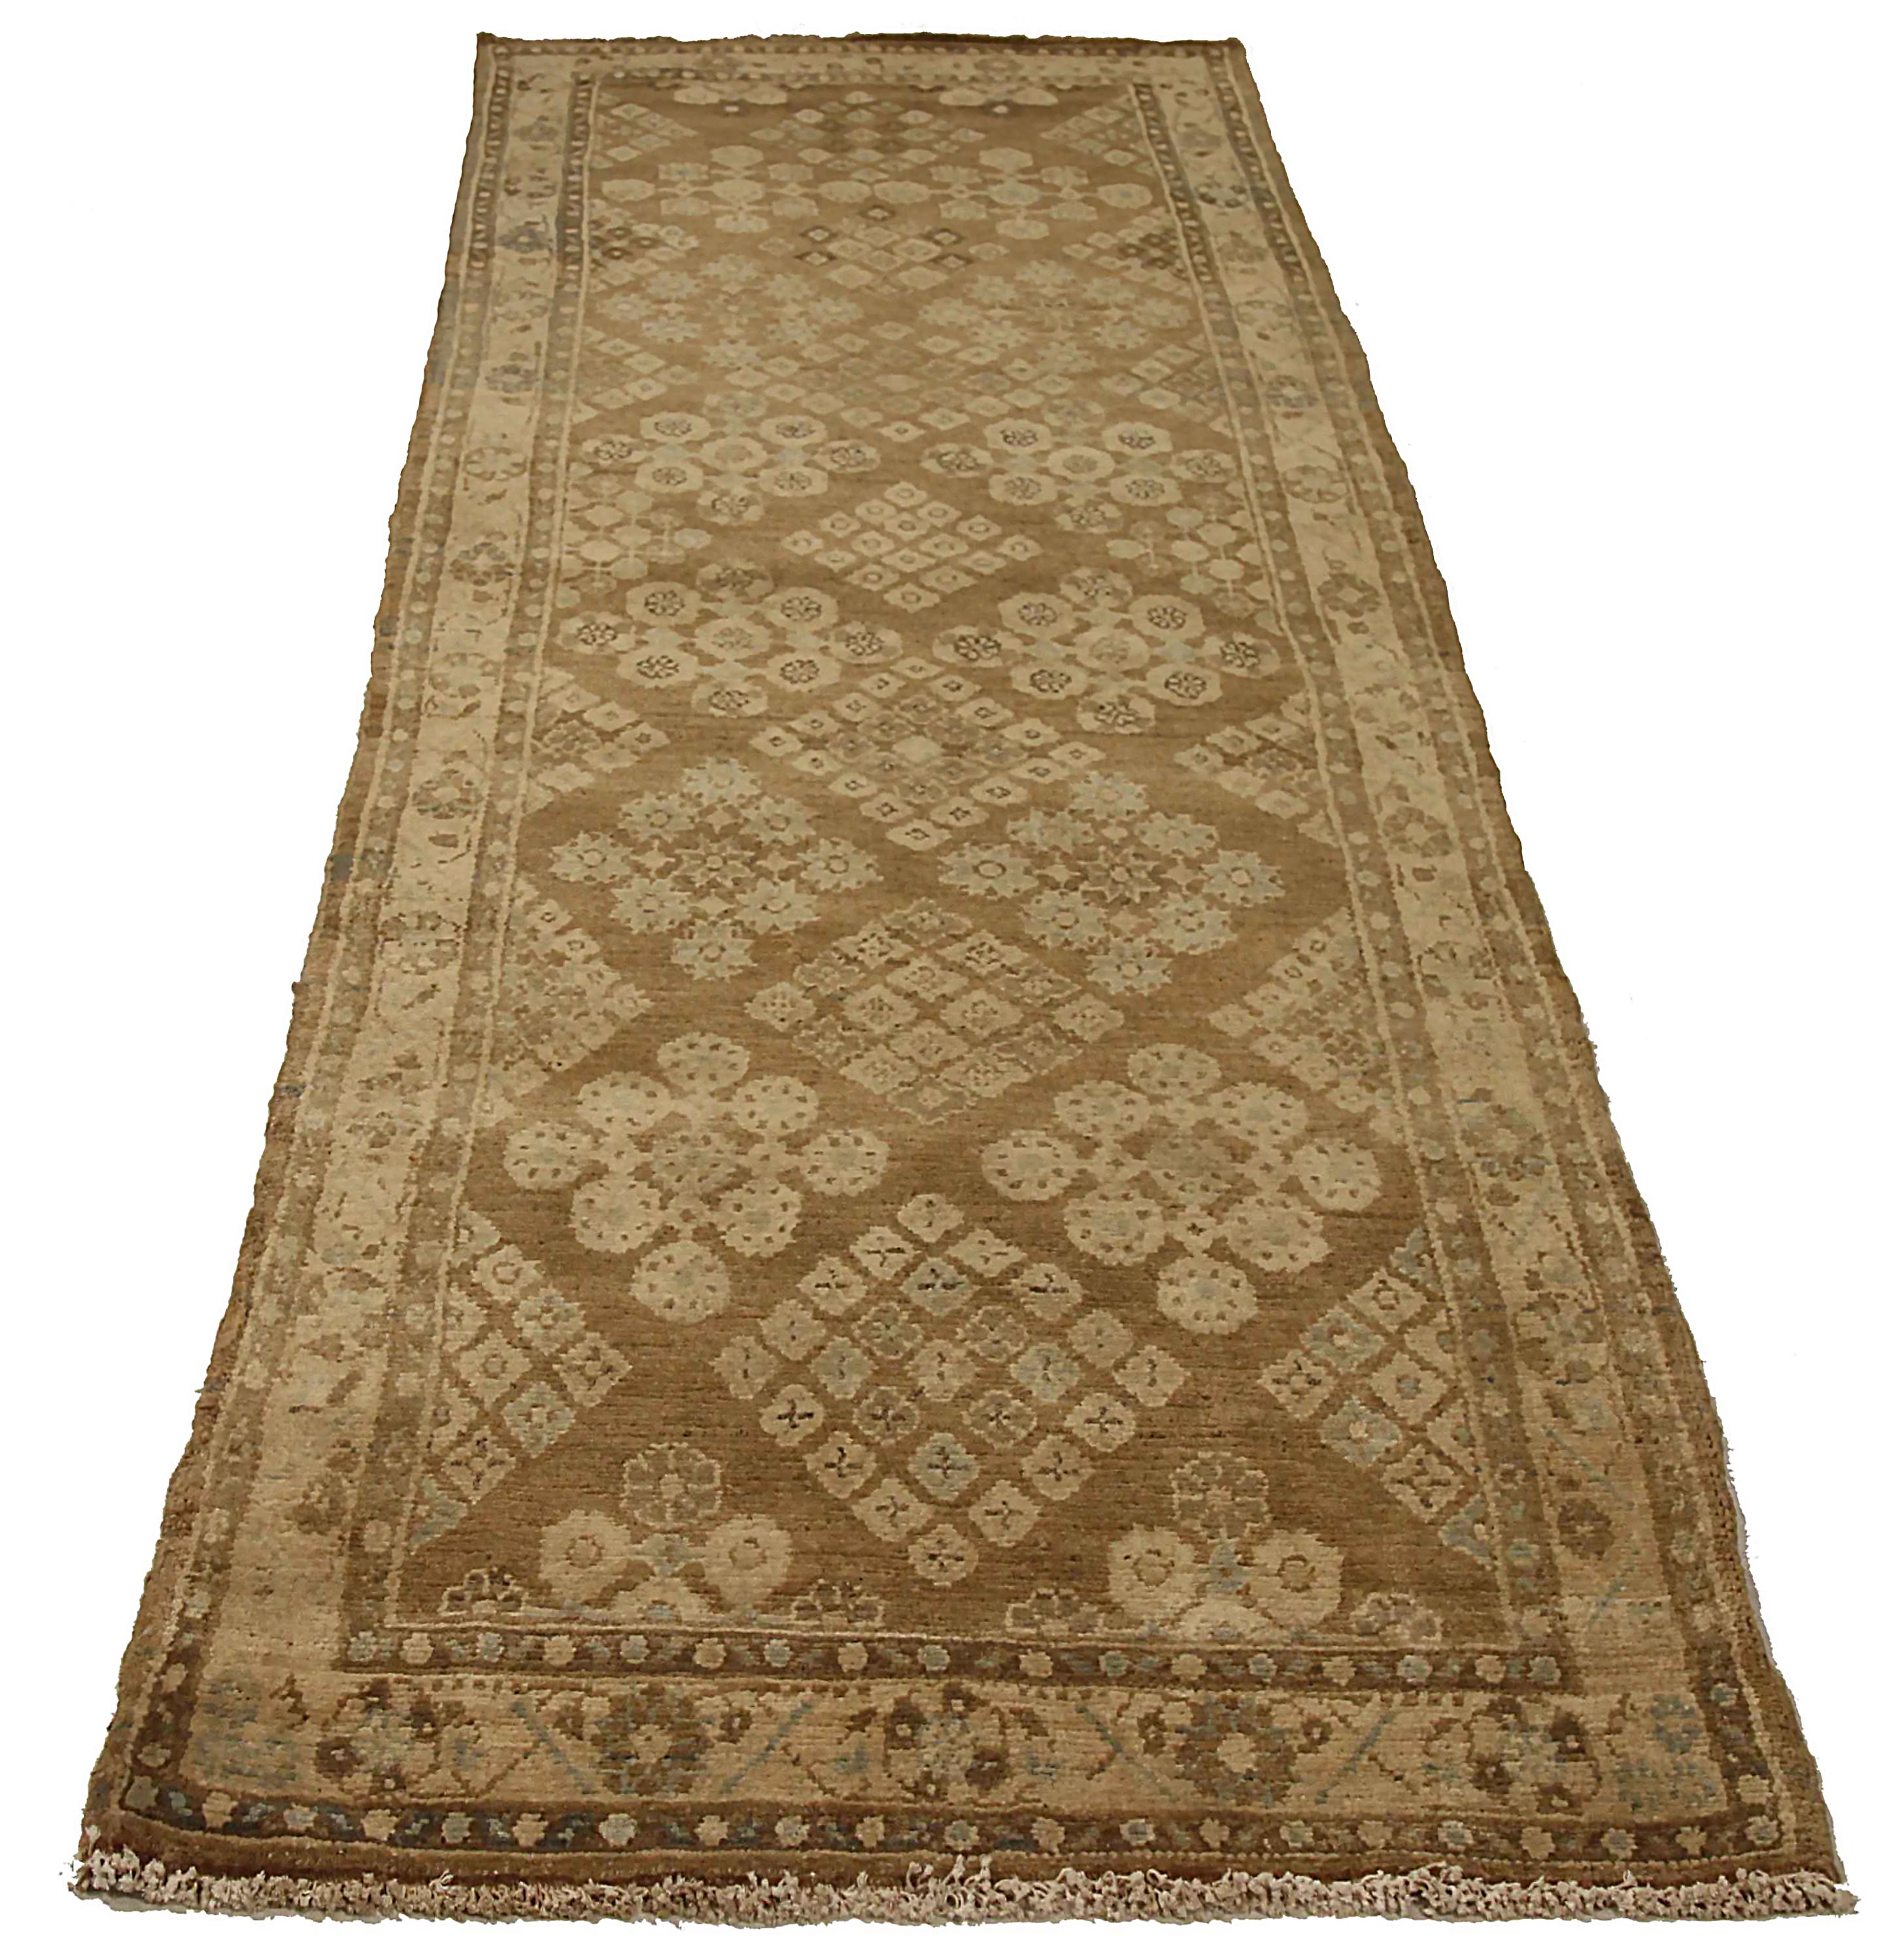 Antique Persian runner rug handwoven from the finest sheep’s wool. It’s colored with all-natural vegetable dyes that are safe for humans and pets. It’s a traditional Malayer design featuring gray and ivory floral details on a brown field. It’s a